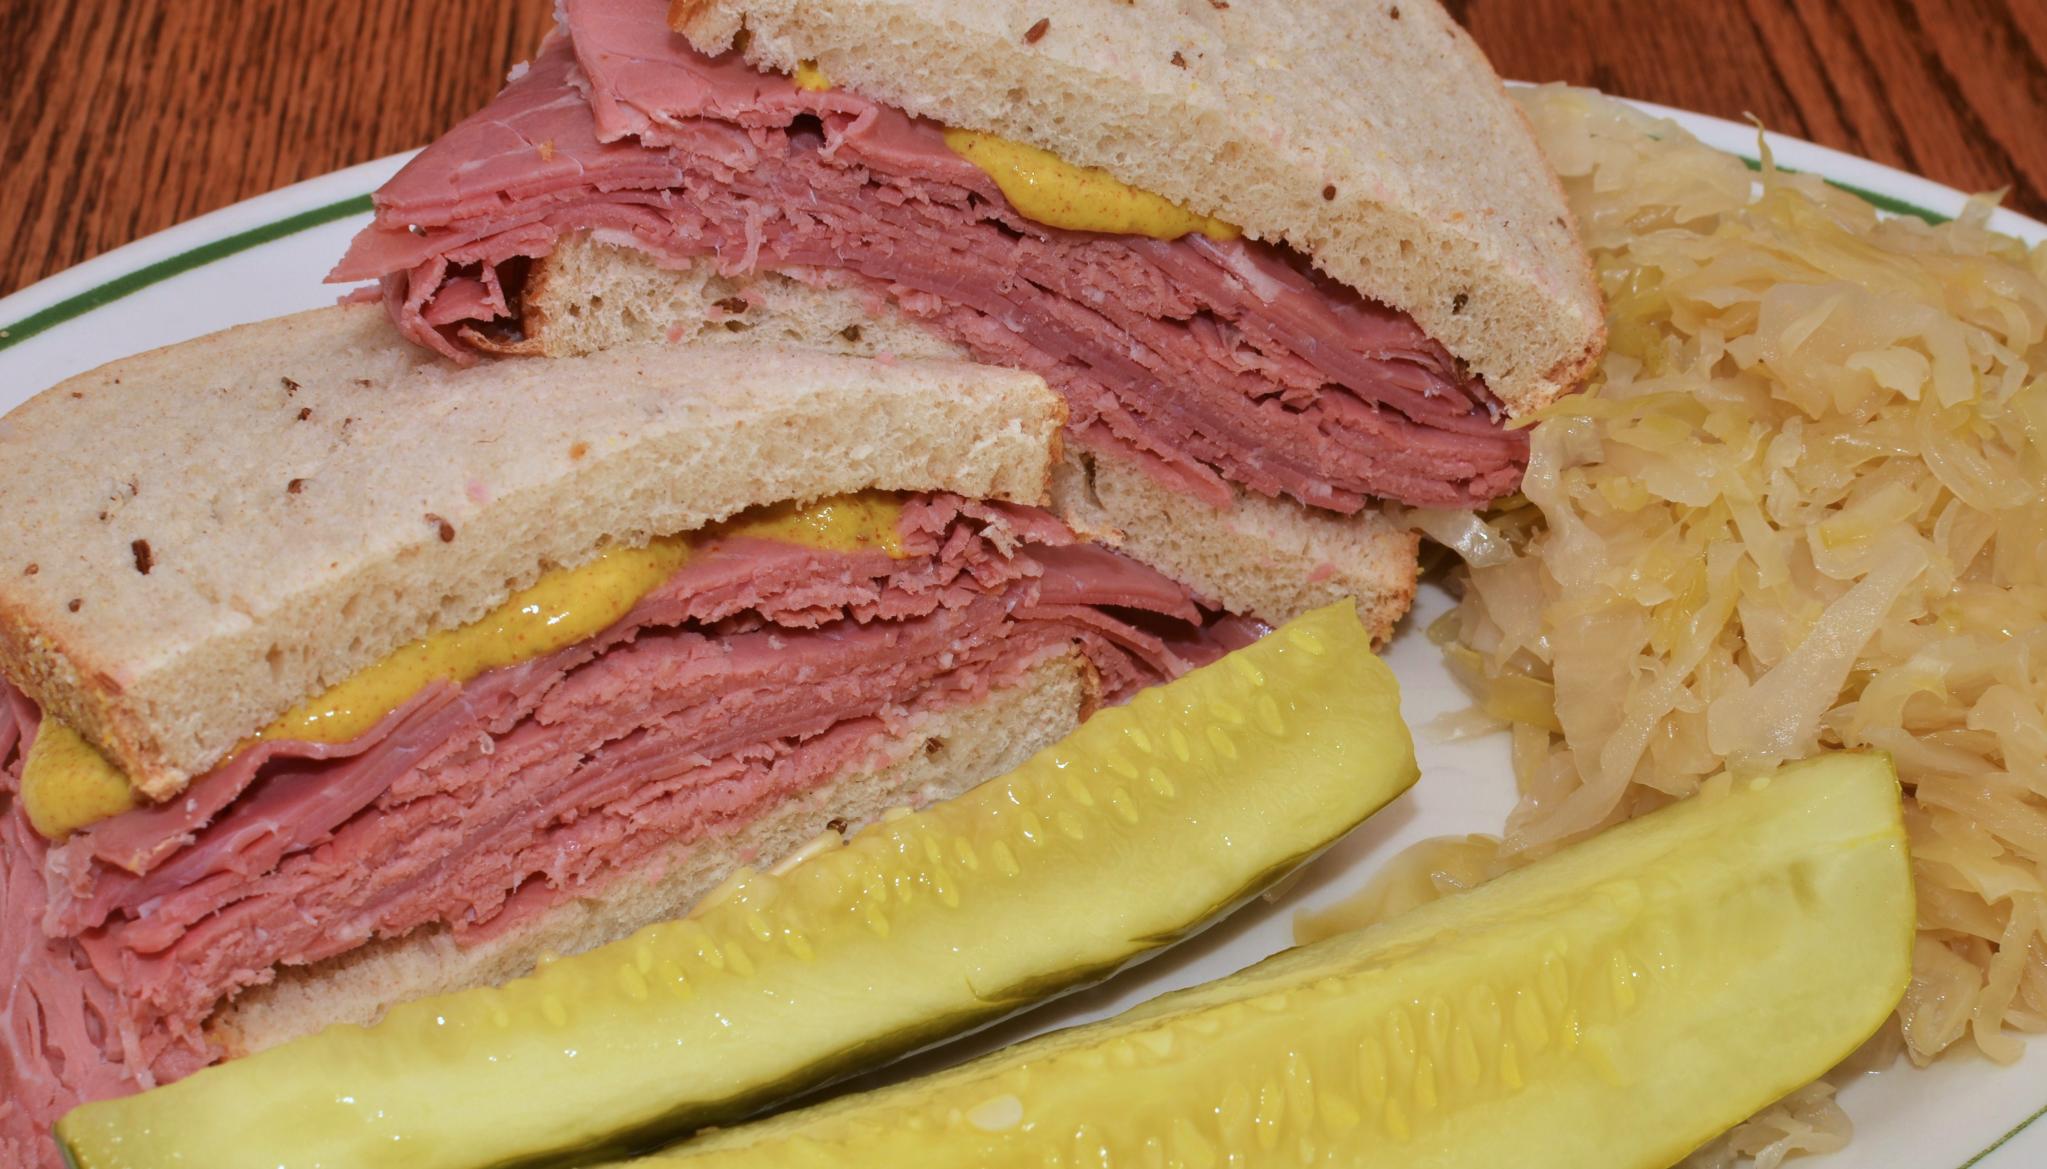 Mmm... corned beef on rye with a side of kraut (7711551990)